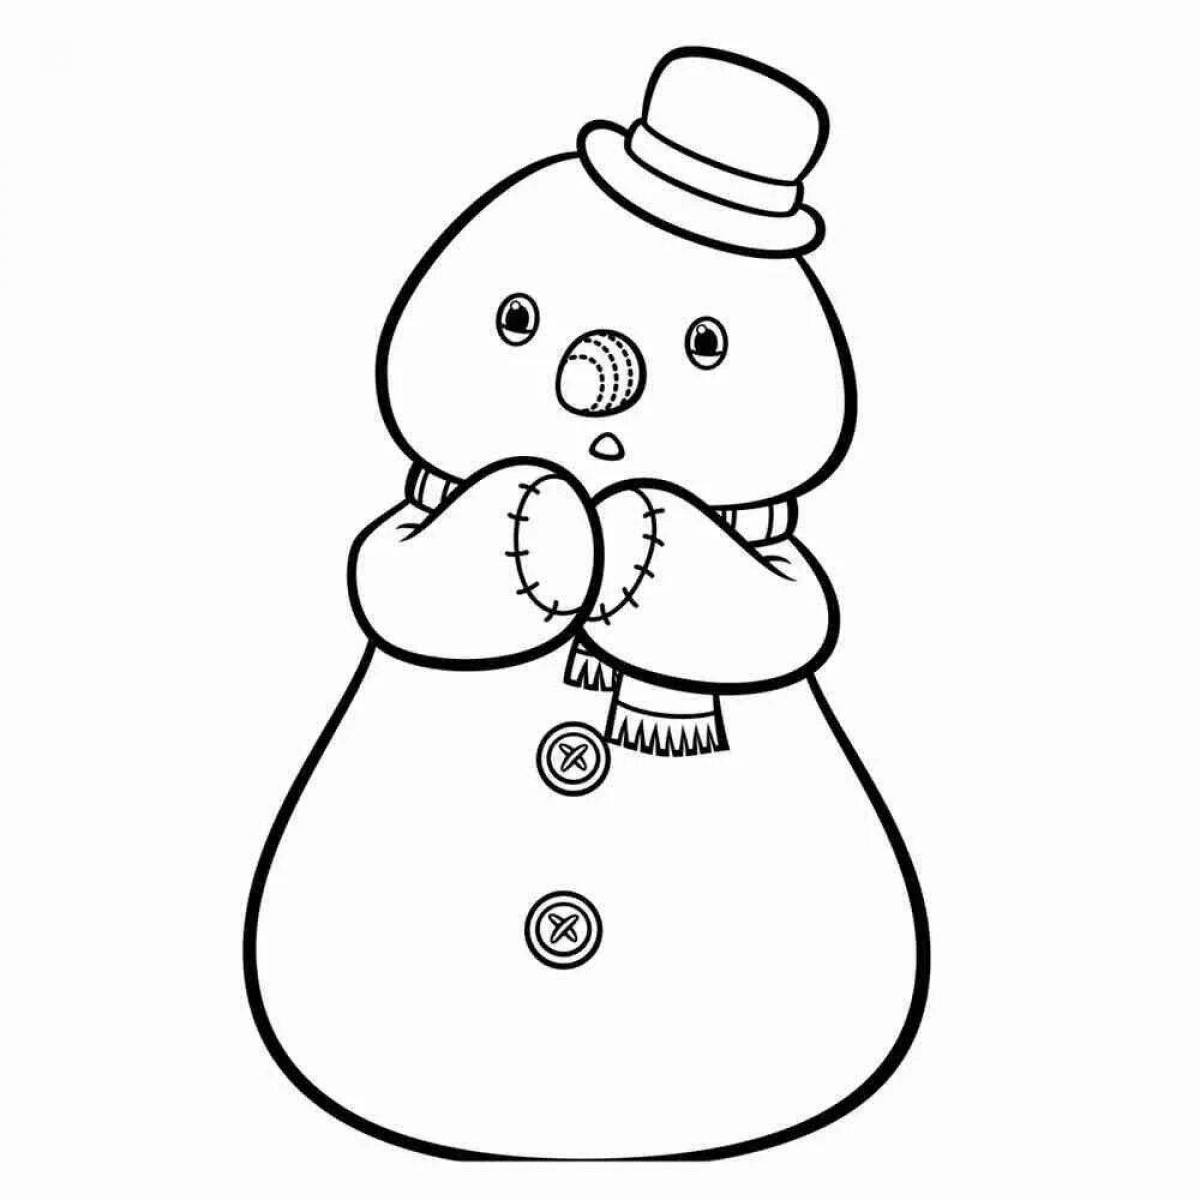 Great coloring snowman without a nose